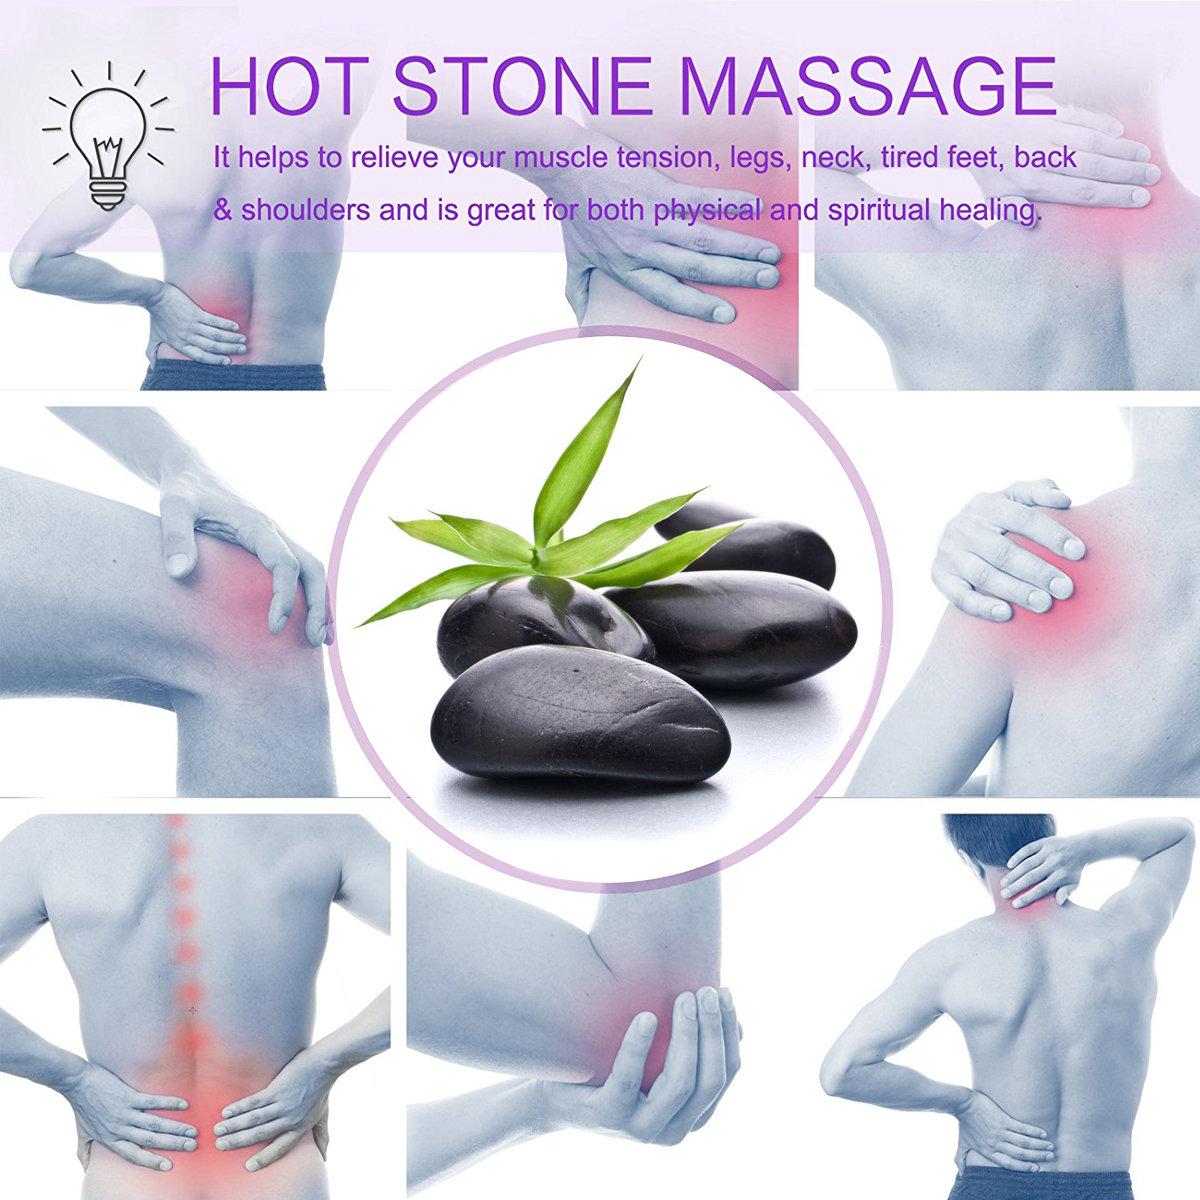 20Pcs-Electric-Massager-Health-Energy-Volcanic-Hot-Stone-Sets-With-Heating-Box-1356446